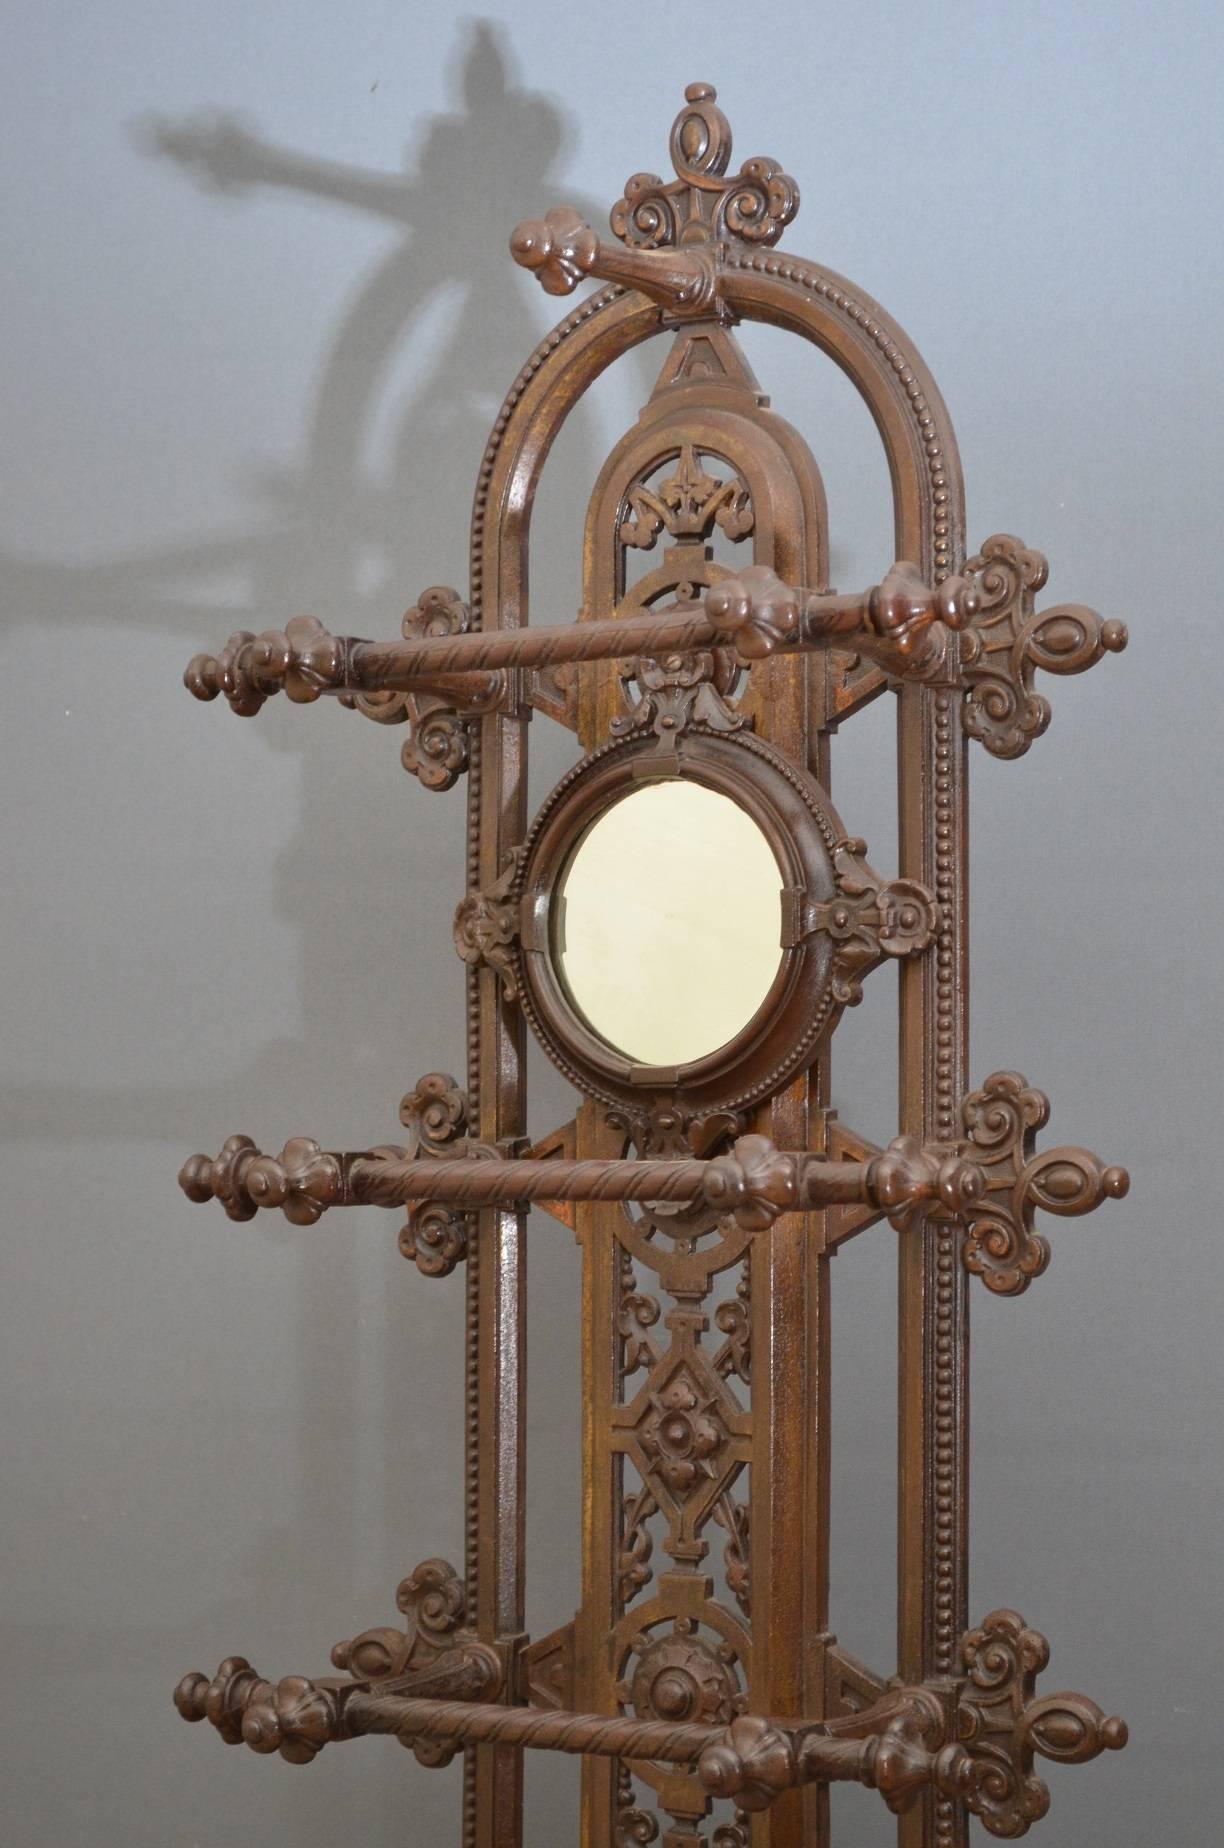 Sn3889 A stylish Victorian, cast iron hall stand / coat stand, having intricate pierced design with circular mirror and coat hooks, supported on fluted uprights with umbrella and stick holders and removable drip tray to base. This Victorian hall